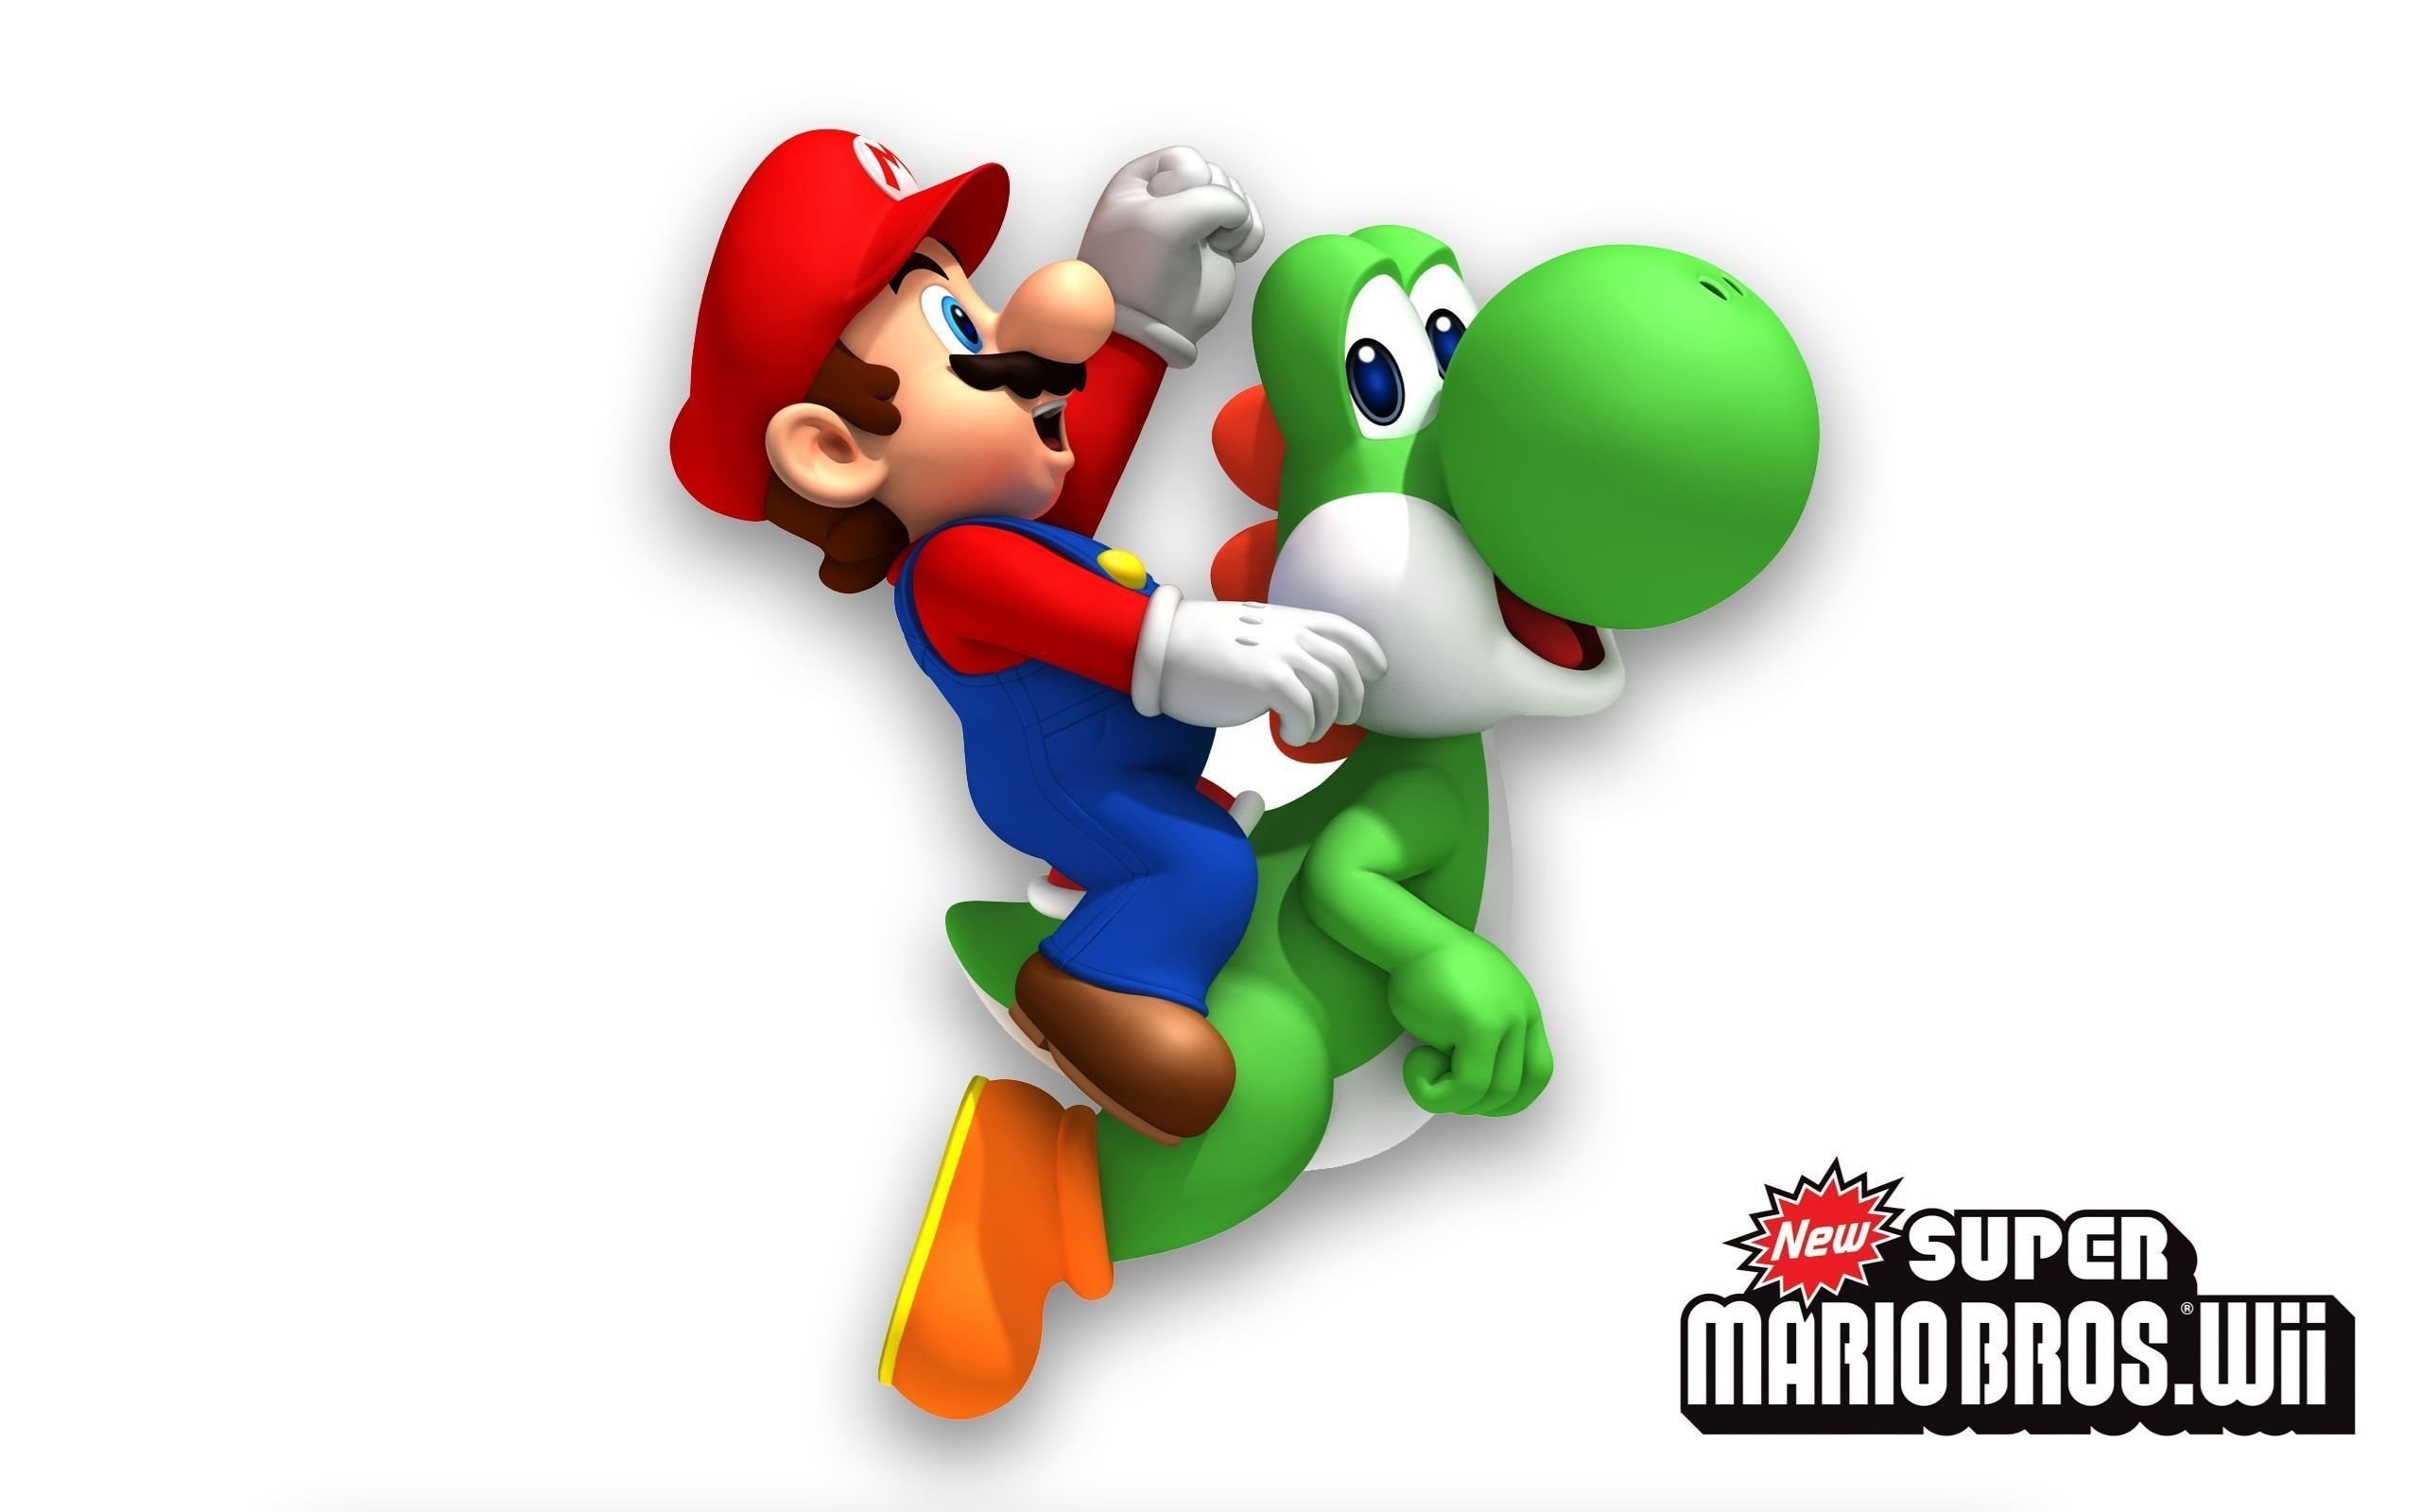 2560x1600 8 New Super Mario Bros. Wii HD Wallpapers